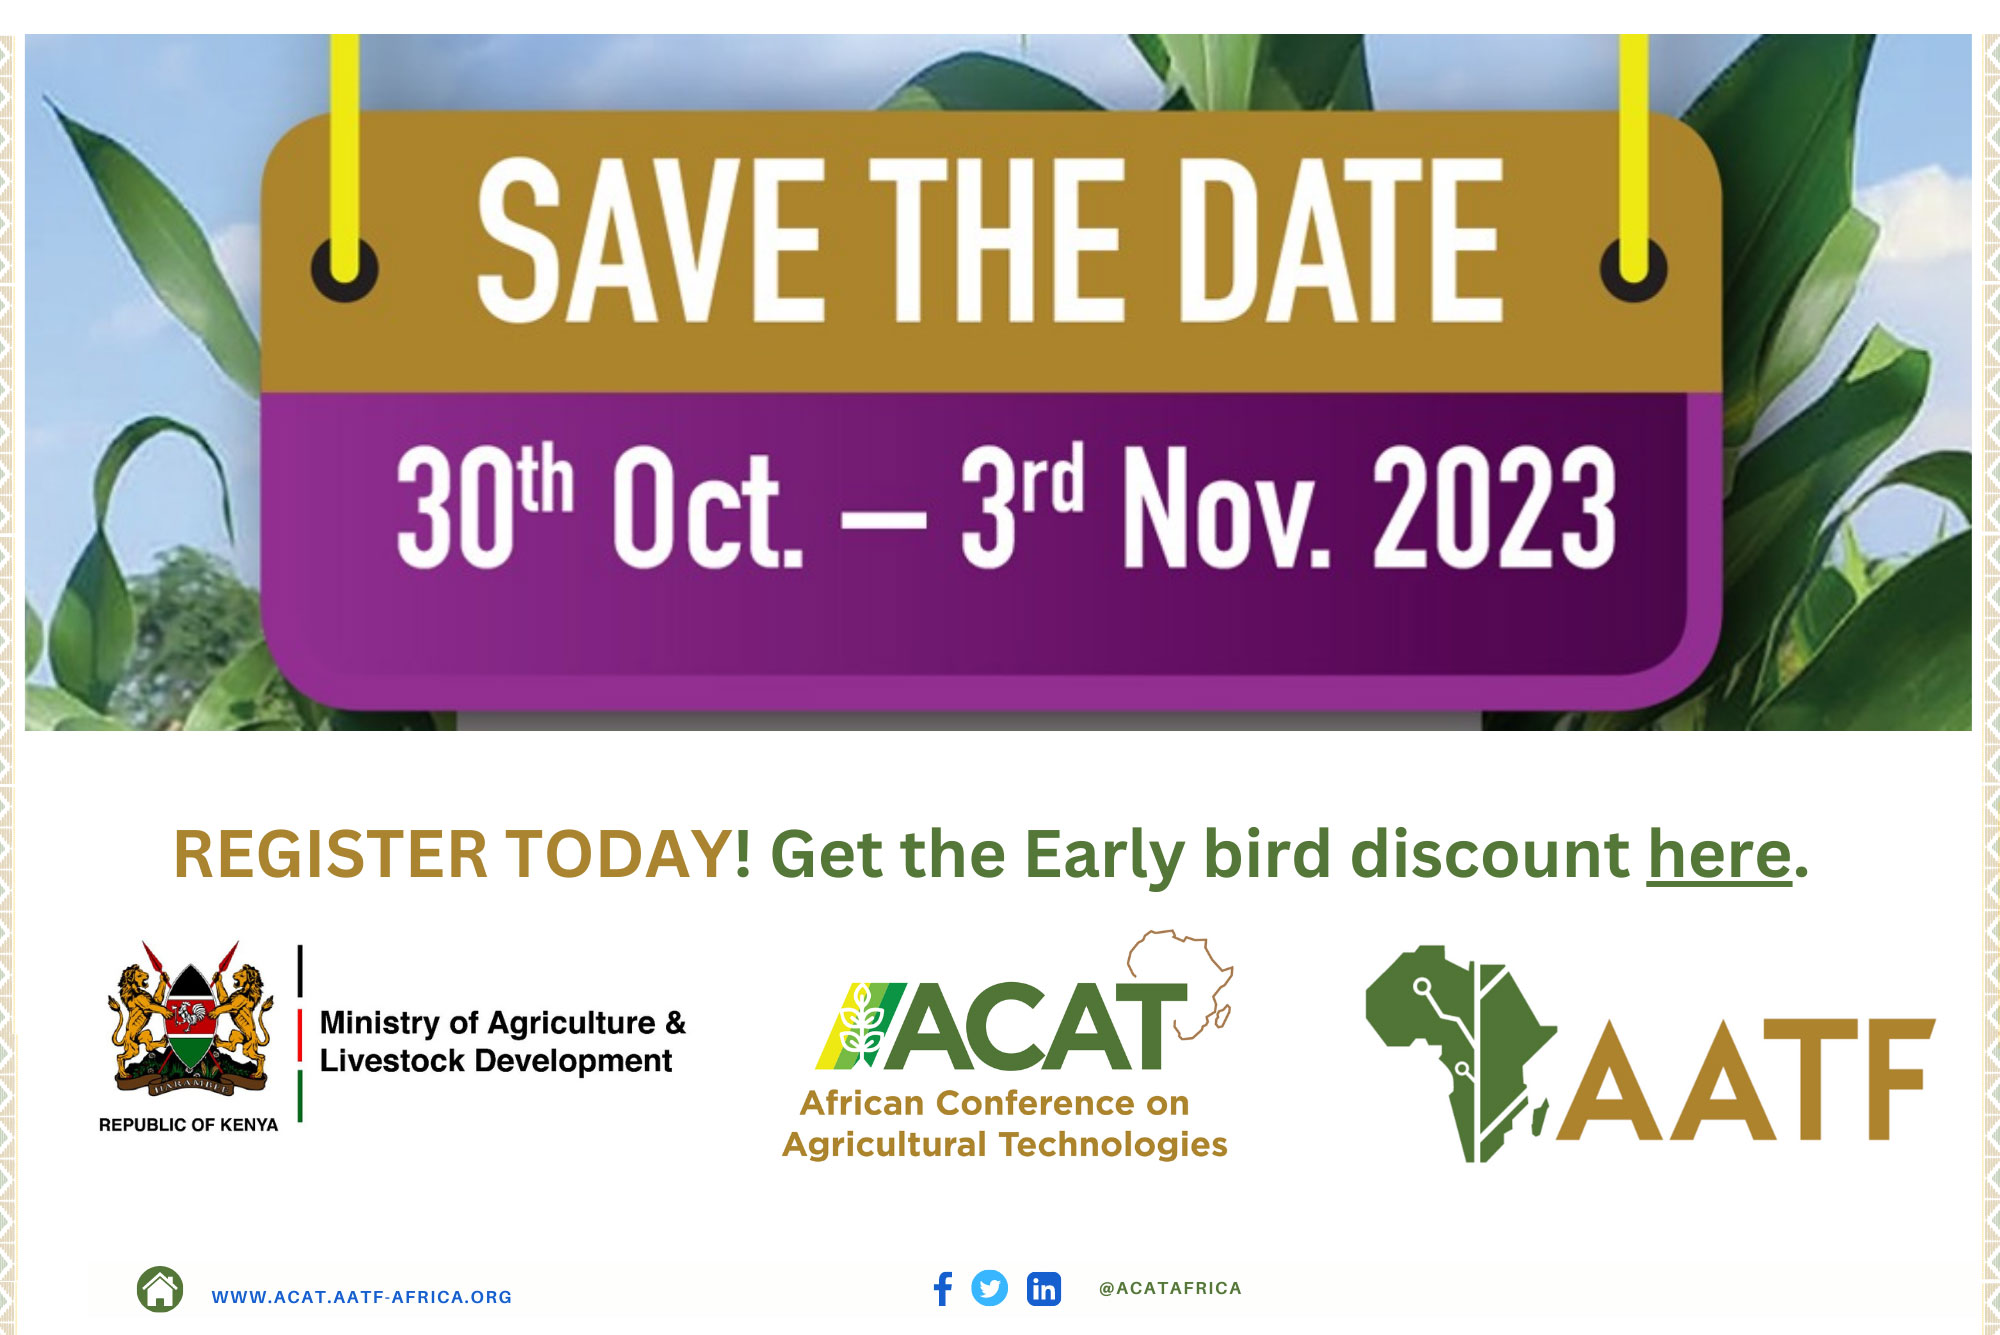  DAILY TRUST NIGERIA: Kenya, AATF To Host Inaugural African Agritech Conference